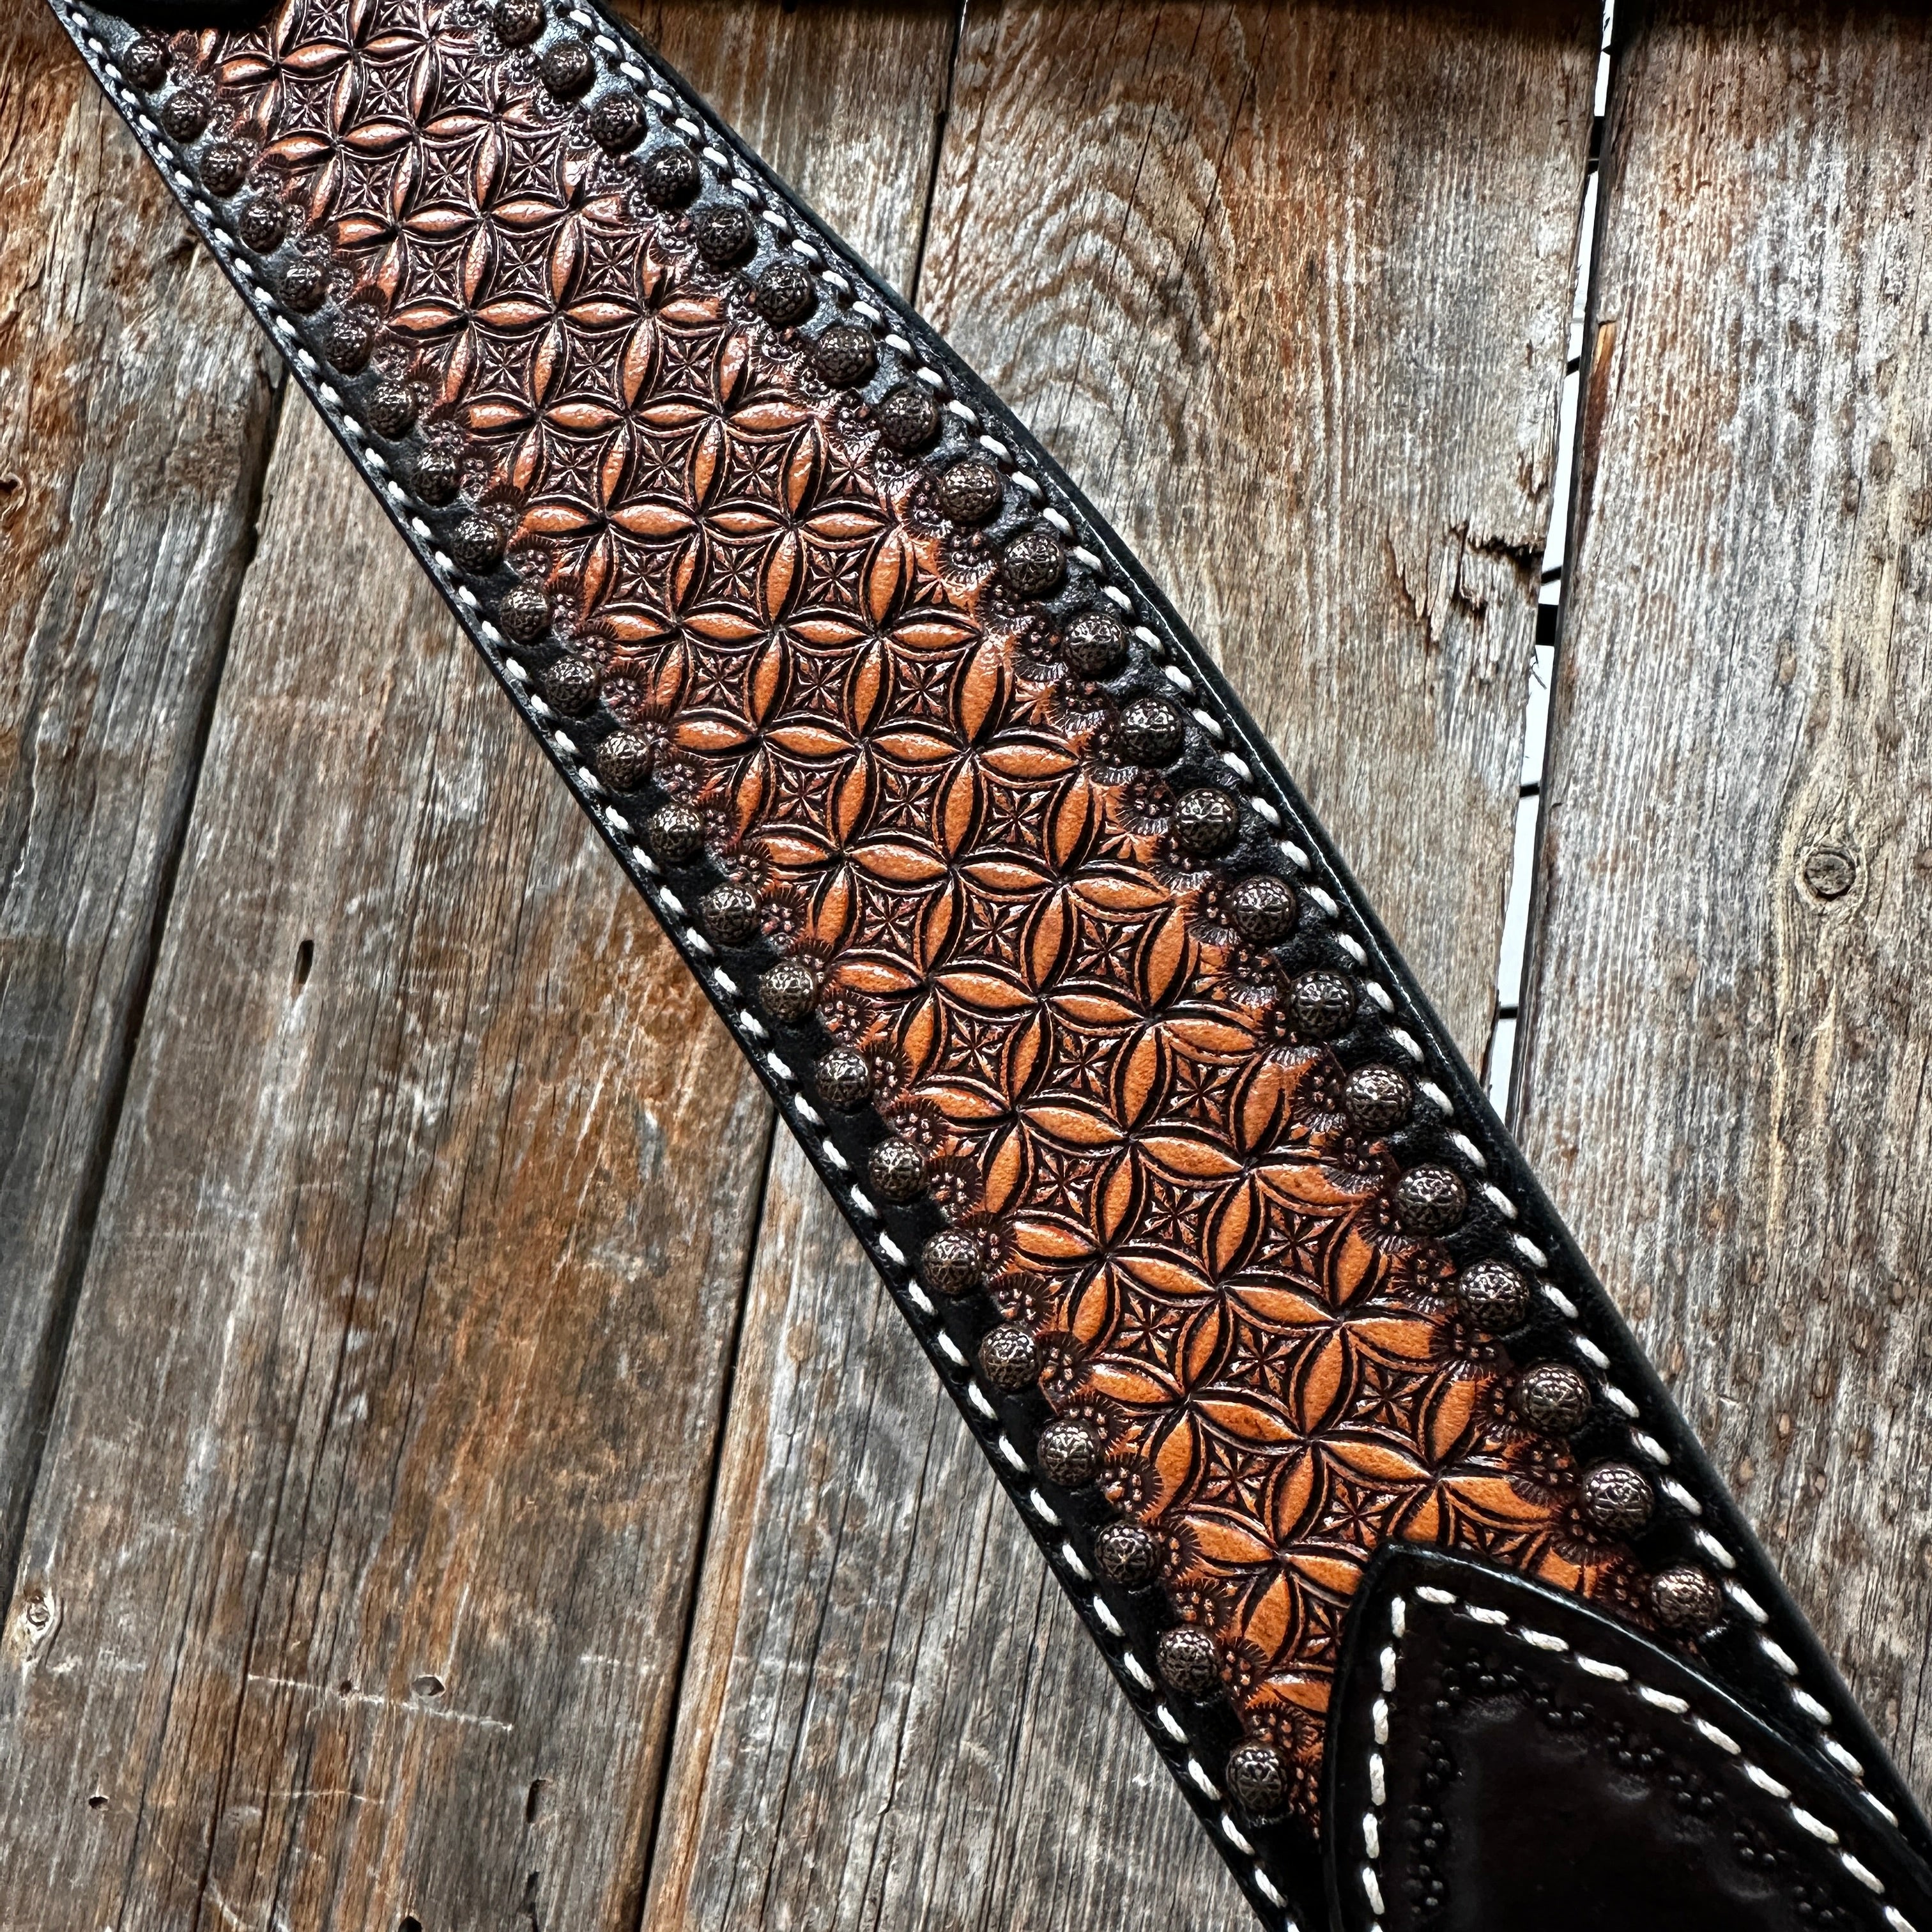 Two Tone Honeycomb Browband/One Ear Breastcollar Tack Sets